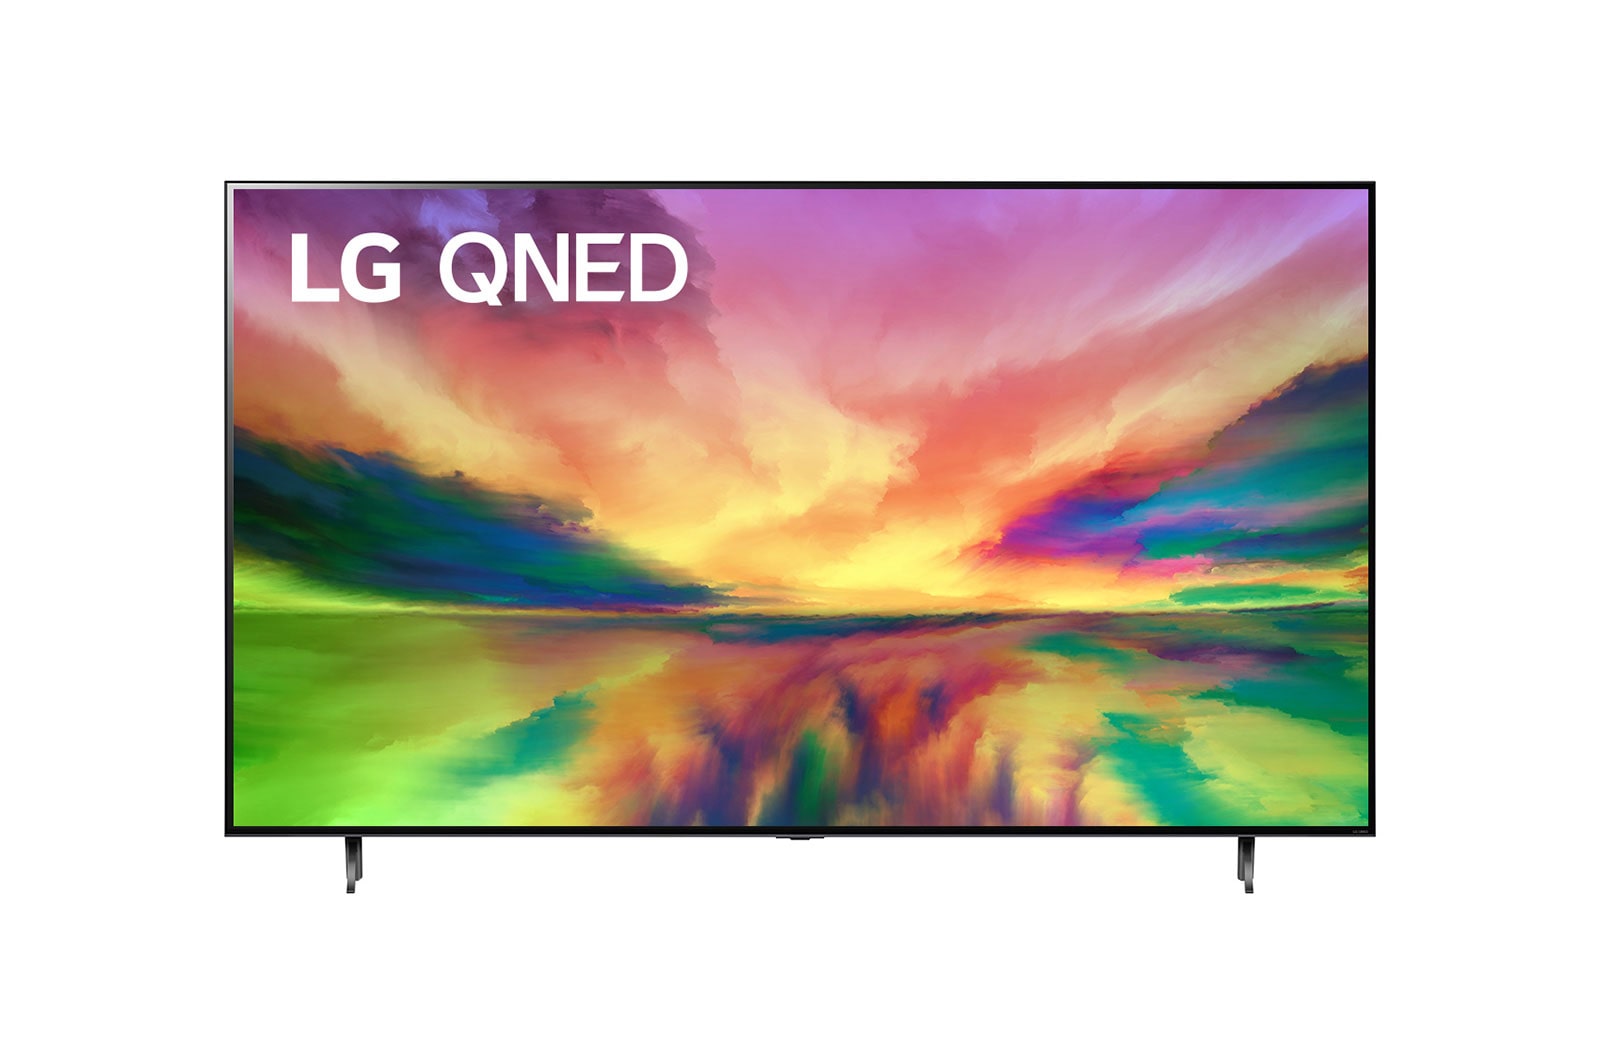 LG QNED TV QNED80 86 (218cm) 4K Smart TV | TV Wall Design | WebOS | ThinQ AI | AI Picture Pro, 86QNED80SRA